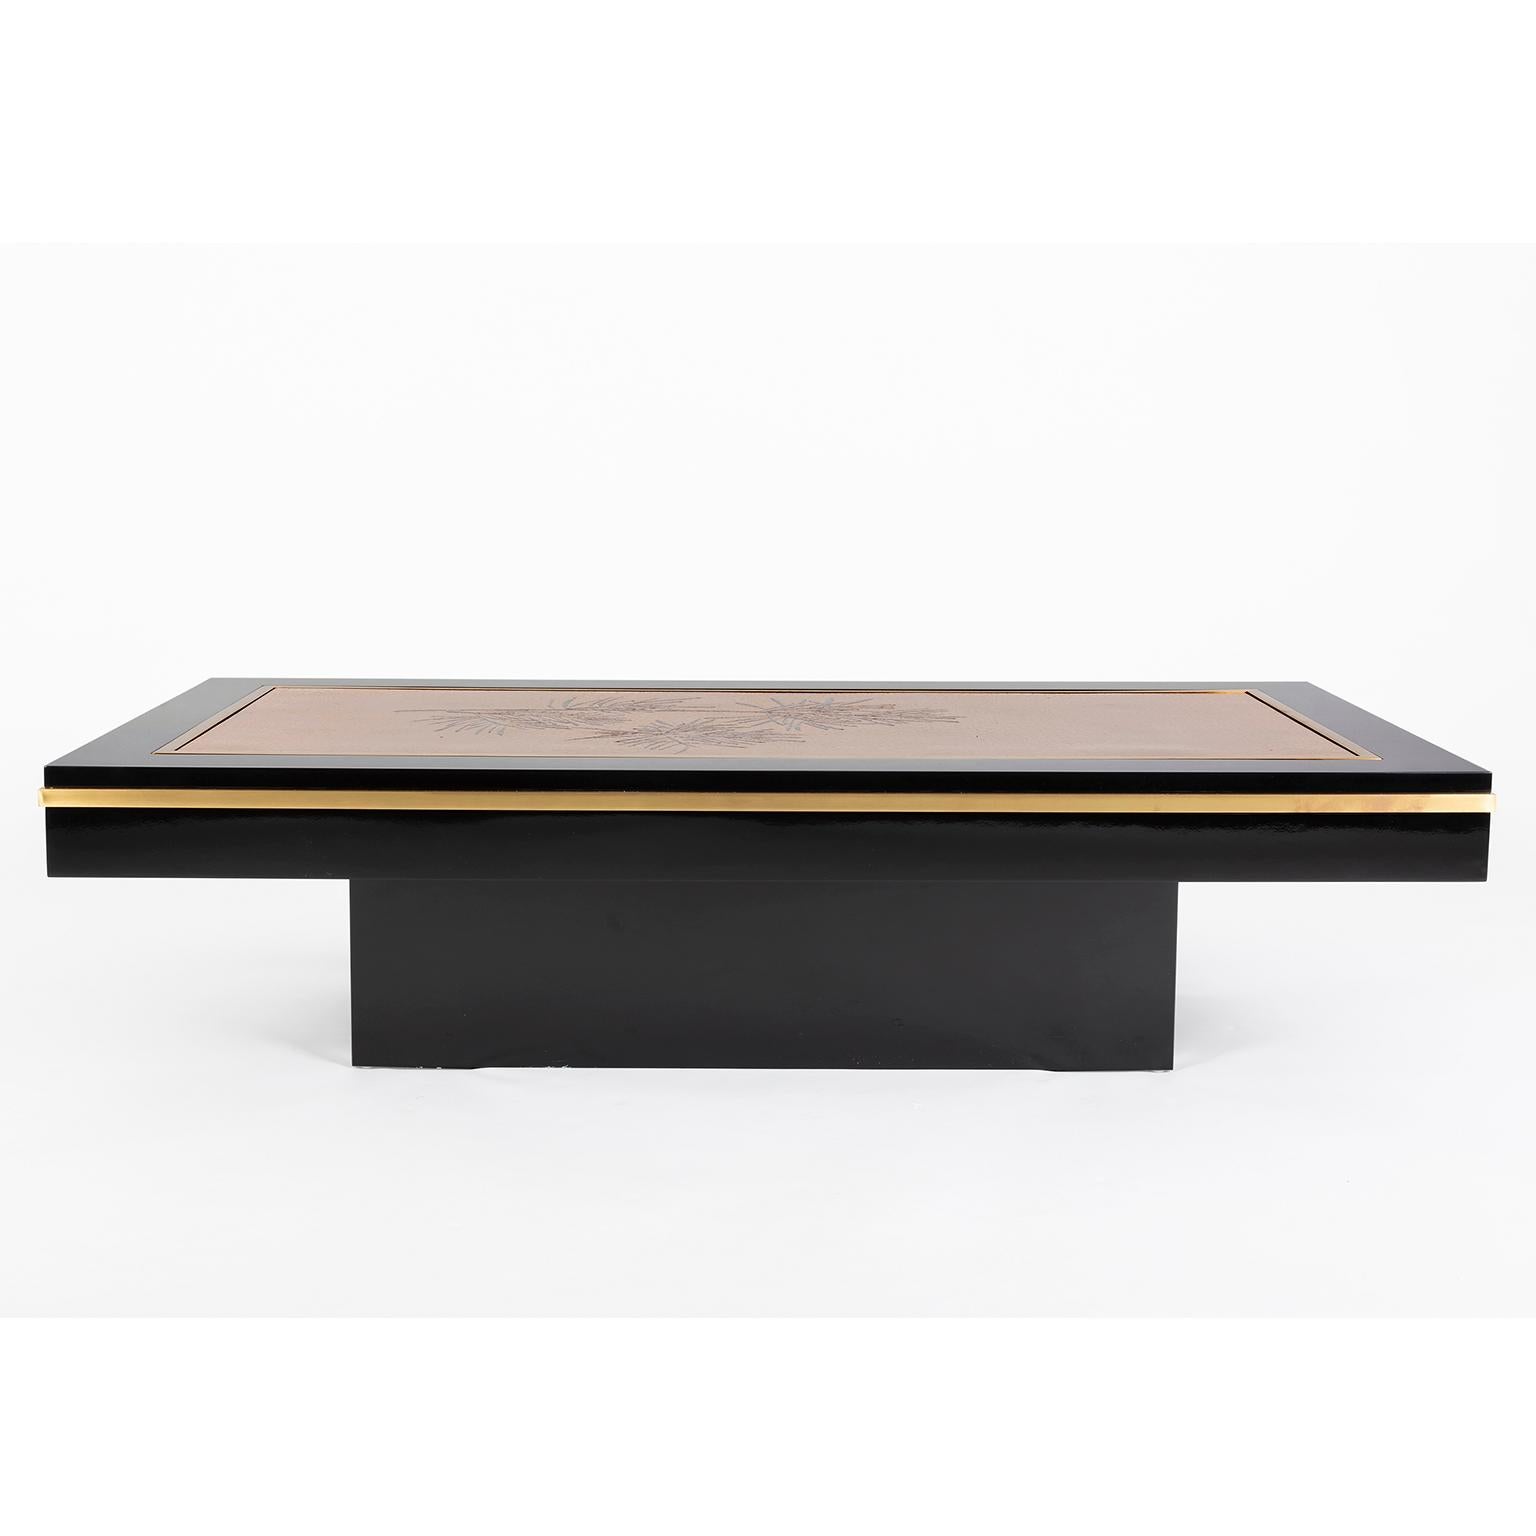 Beautiful Italian coffee table in black lacquered wood with brass frame detail.

The top features an engraved motif with golden and varnished finish with Denisco Signature.

It is a very elegant and delicate piece that has been restaured in the